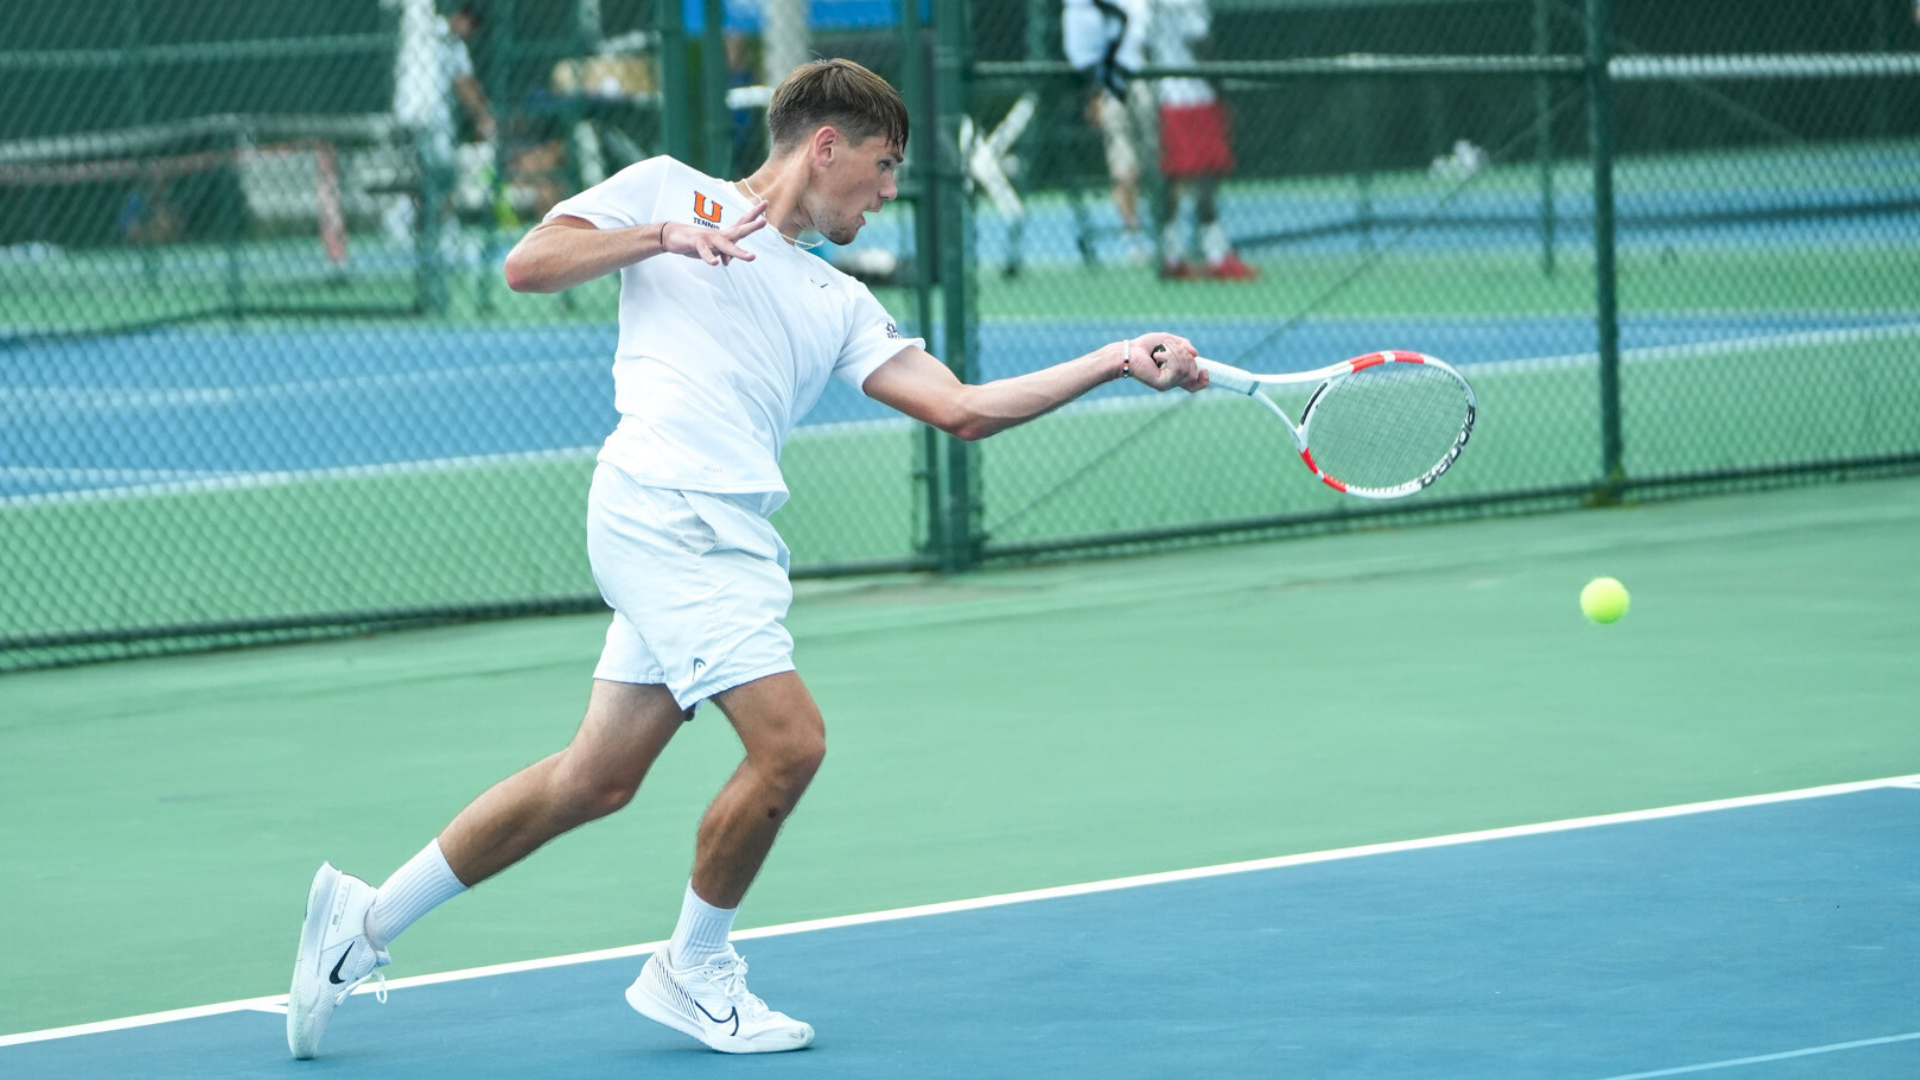 The Bulldogs fall in First Round of NAIA Men&rsquo;s Tennis National Championship